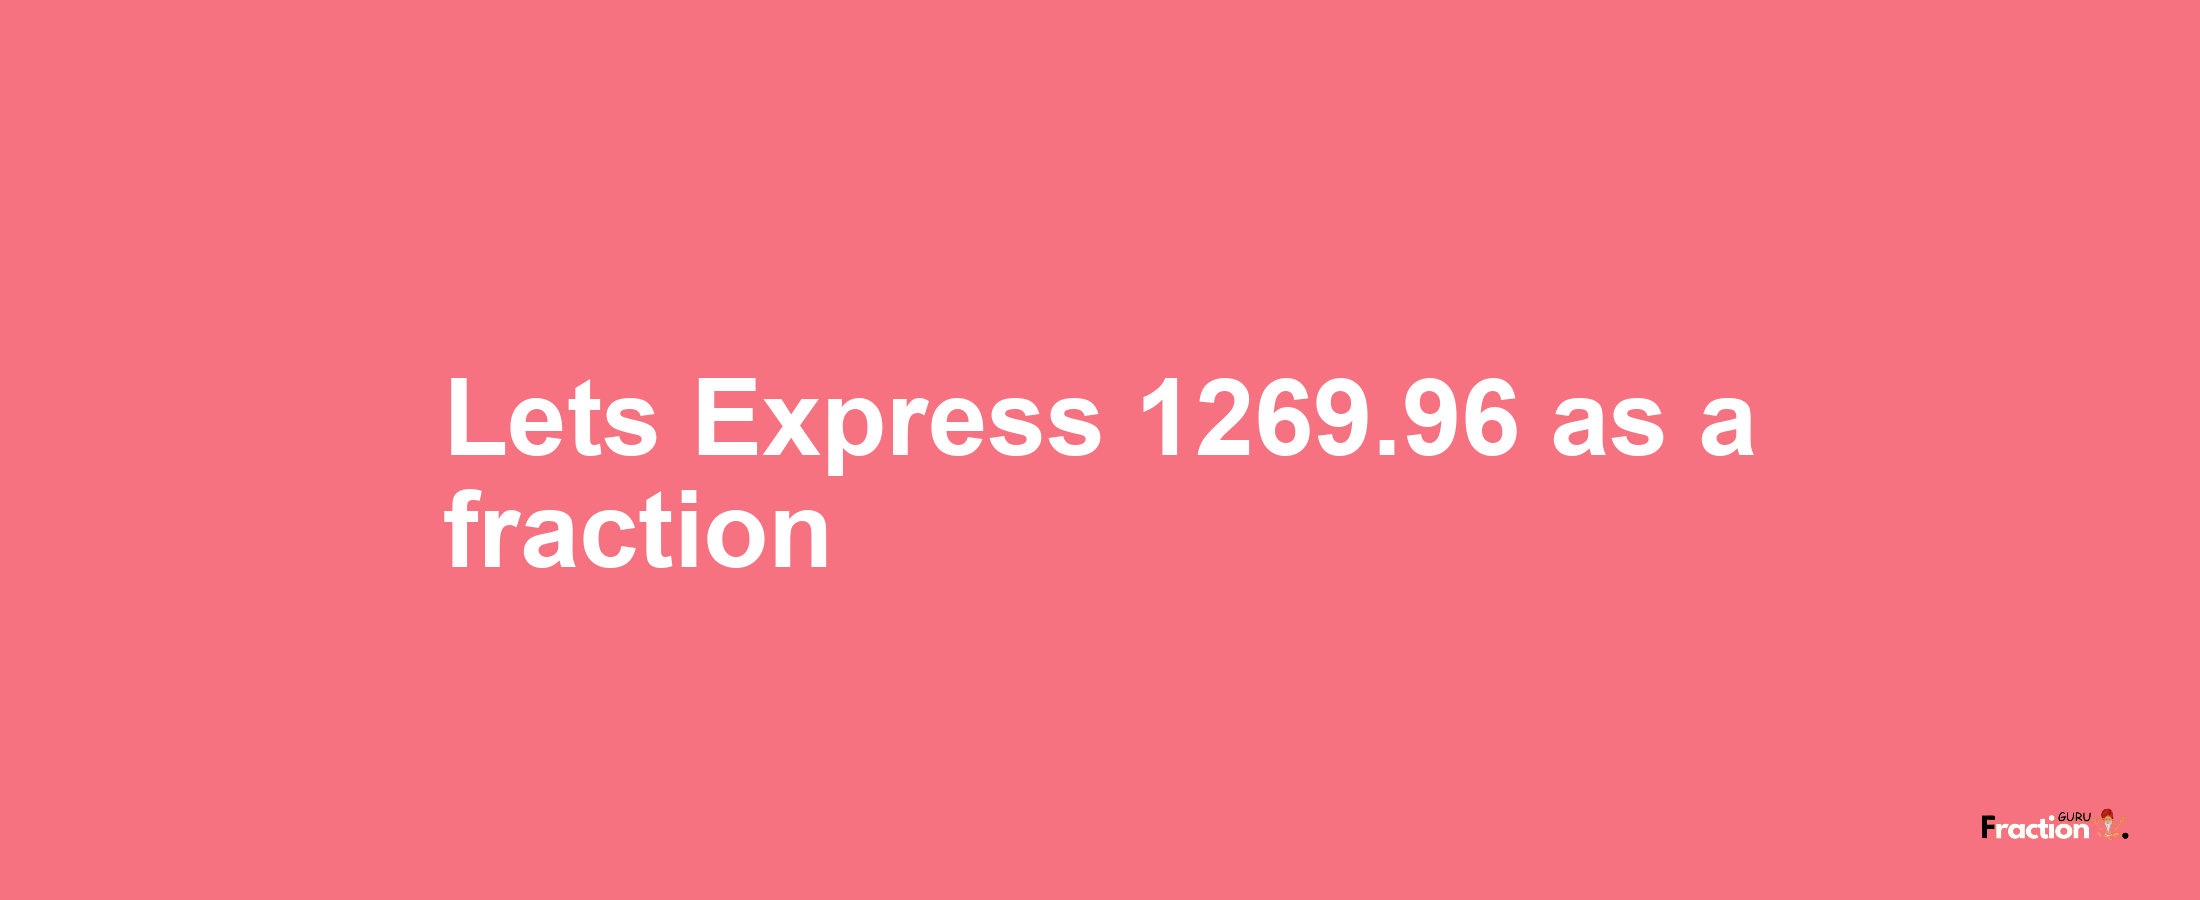 Lets Express 1269.96 as afraction